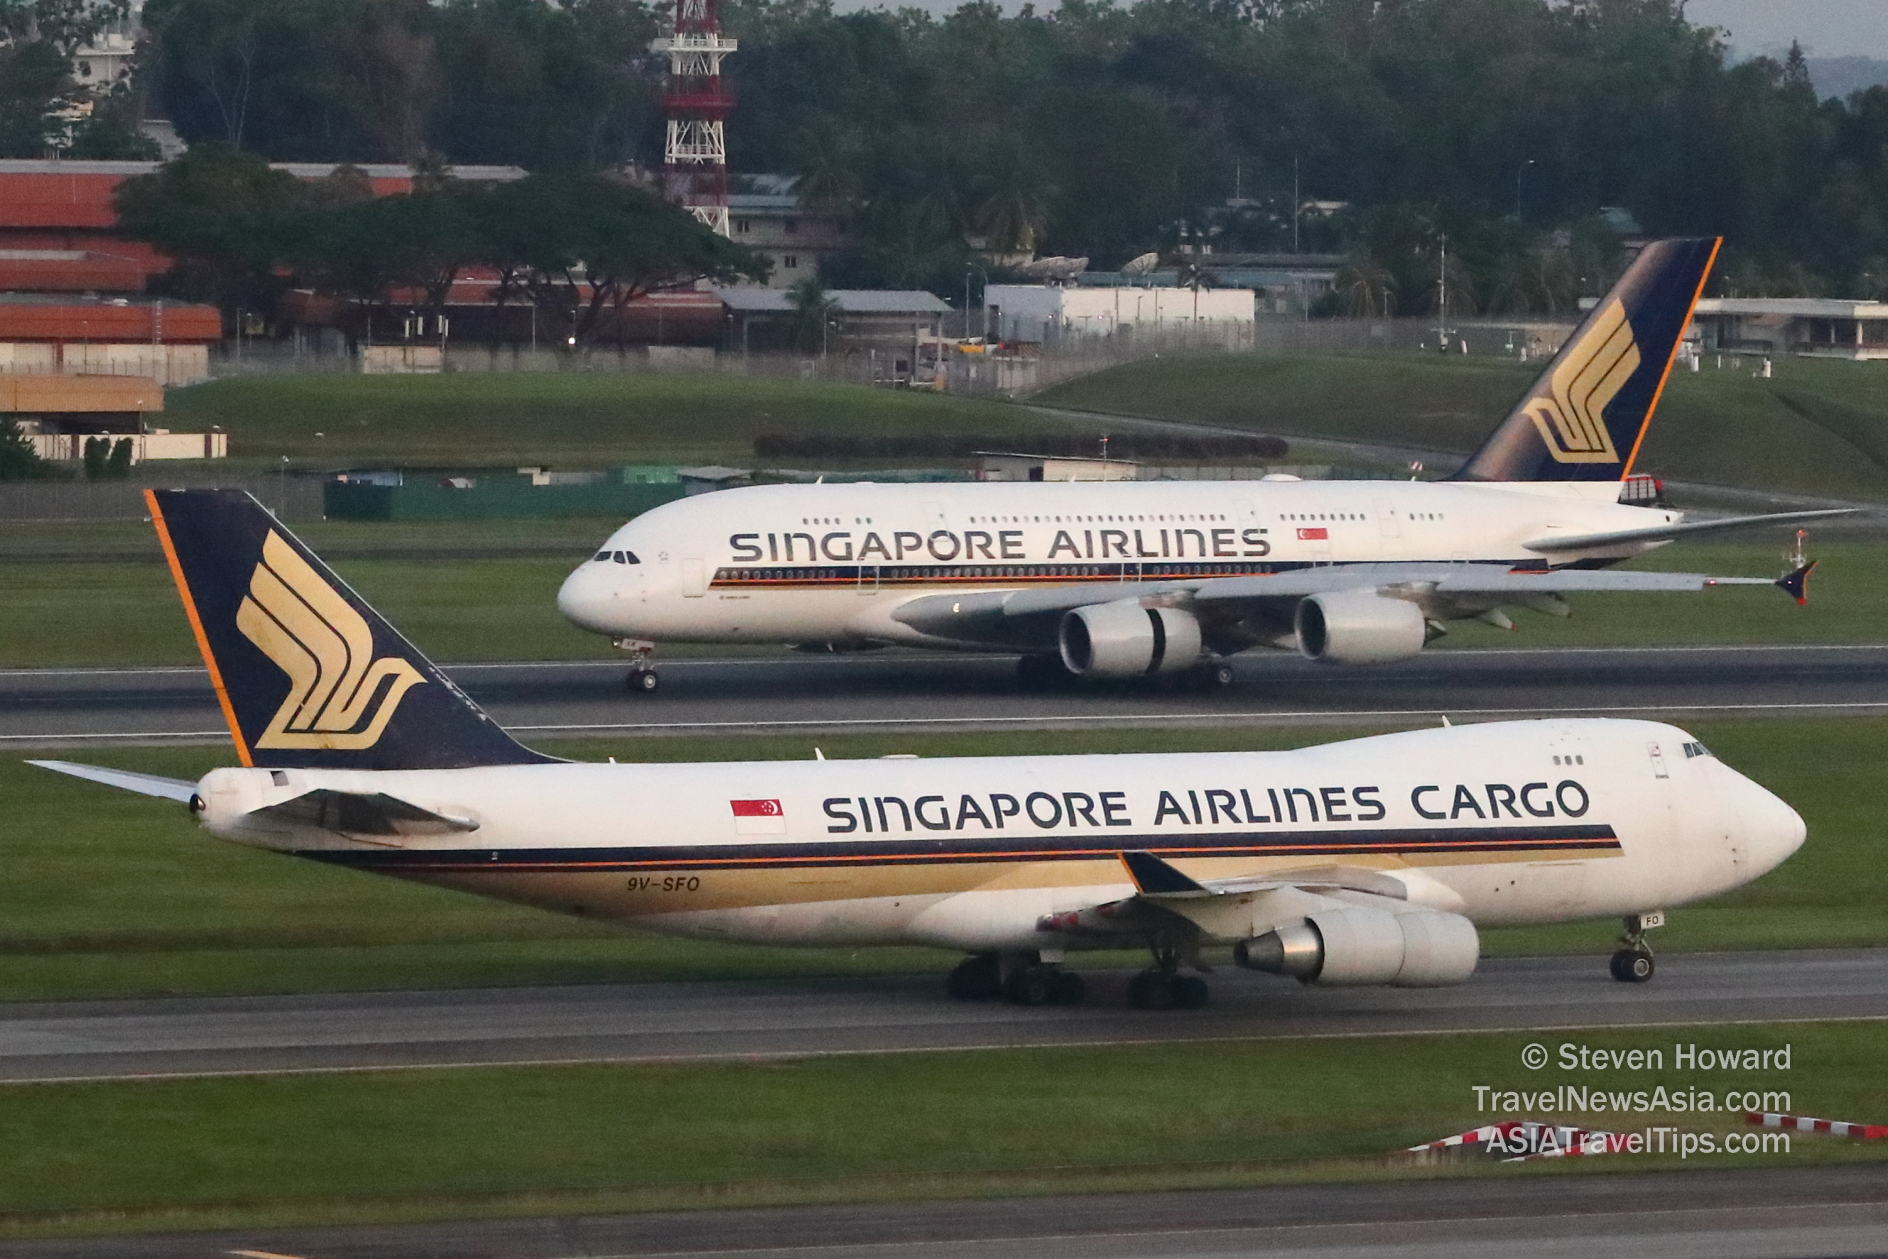 Singapore Airlines aircraft at Changi. Picture by Steven Howard of TravelNewsAsia.com Click to enlarge.